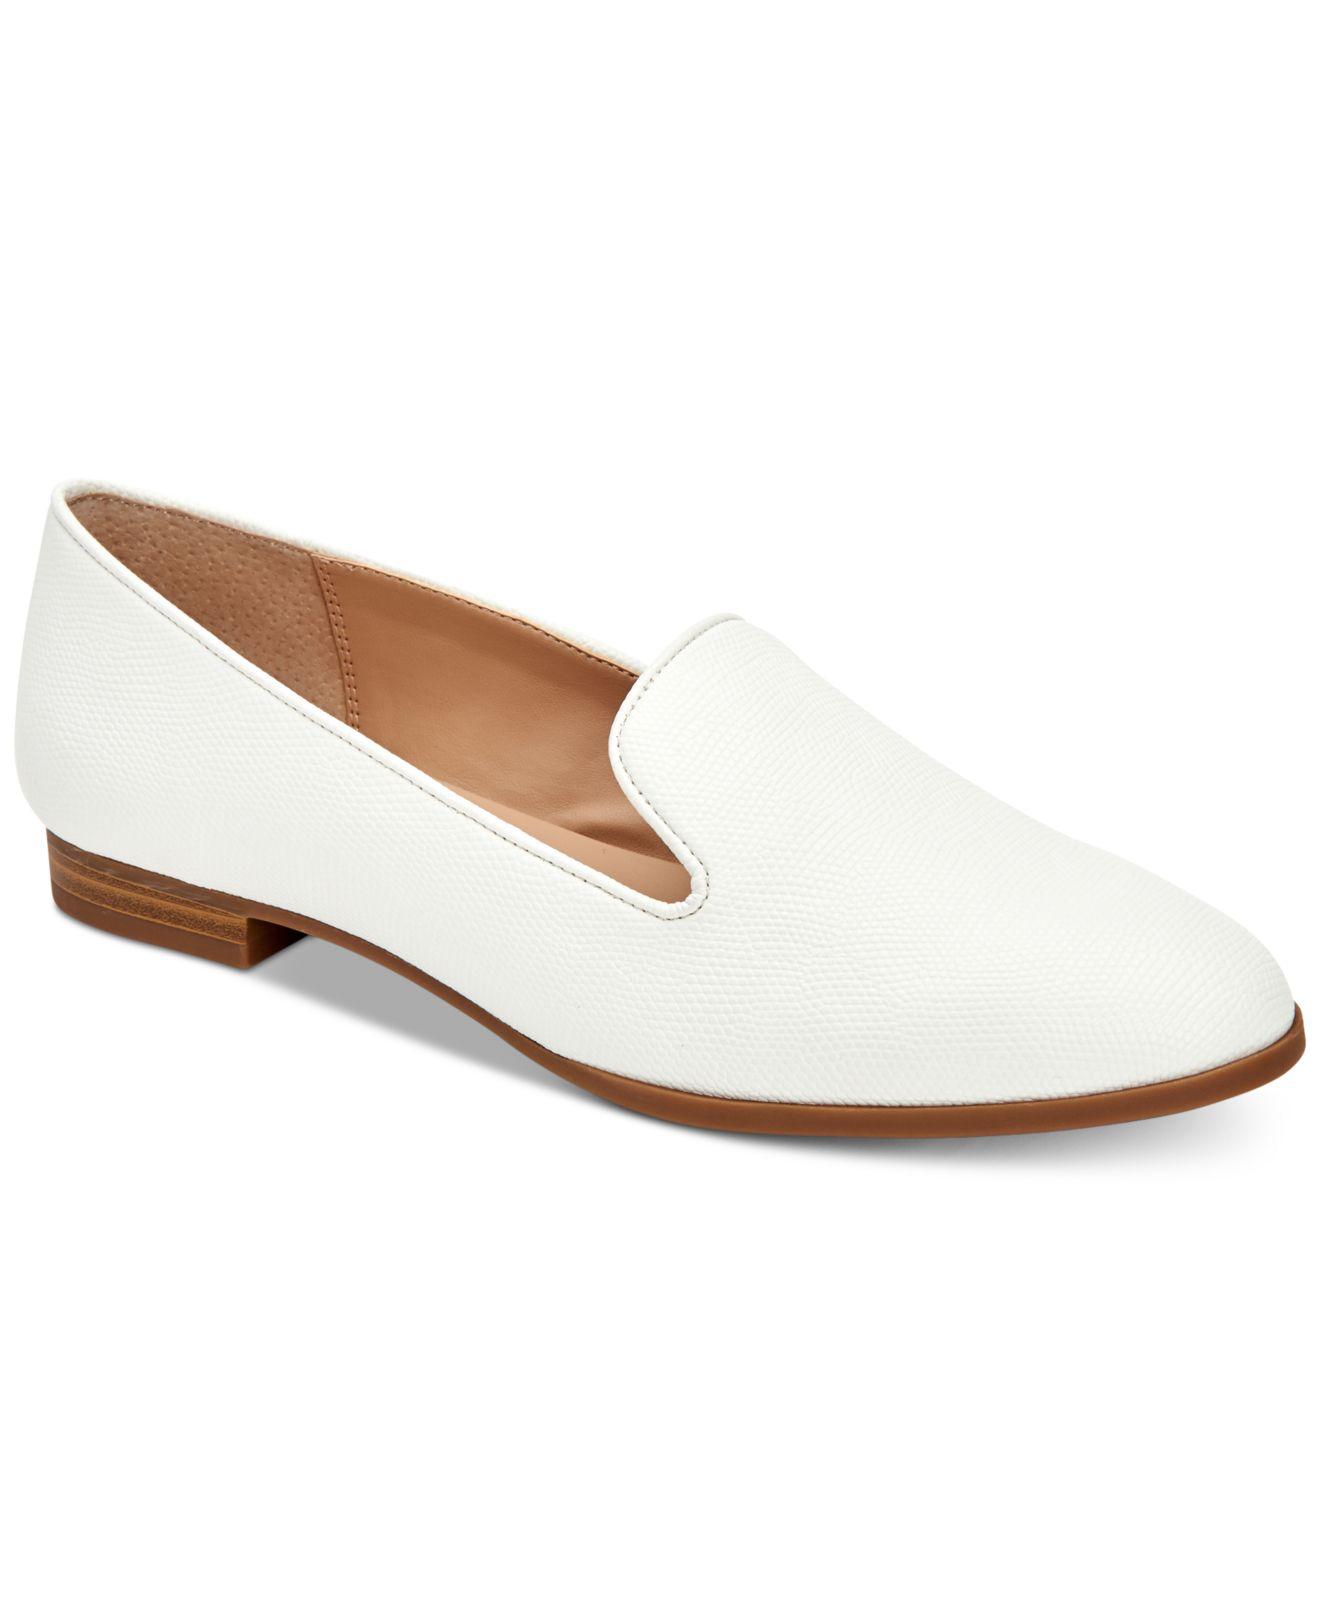 Alfani Womens Oceanaa Leather Closed Toe Loafers, White snk, Size 8.0 ...